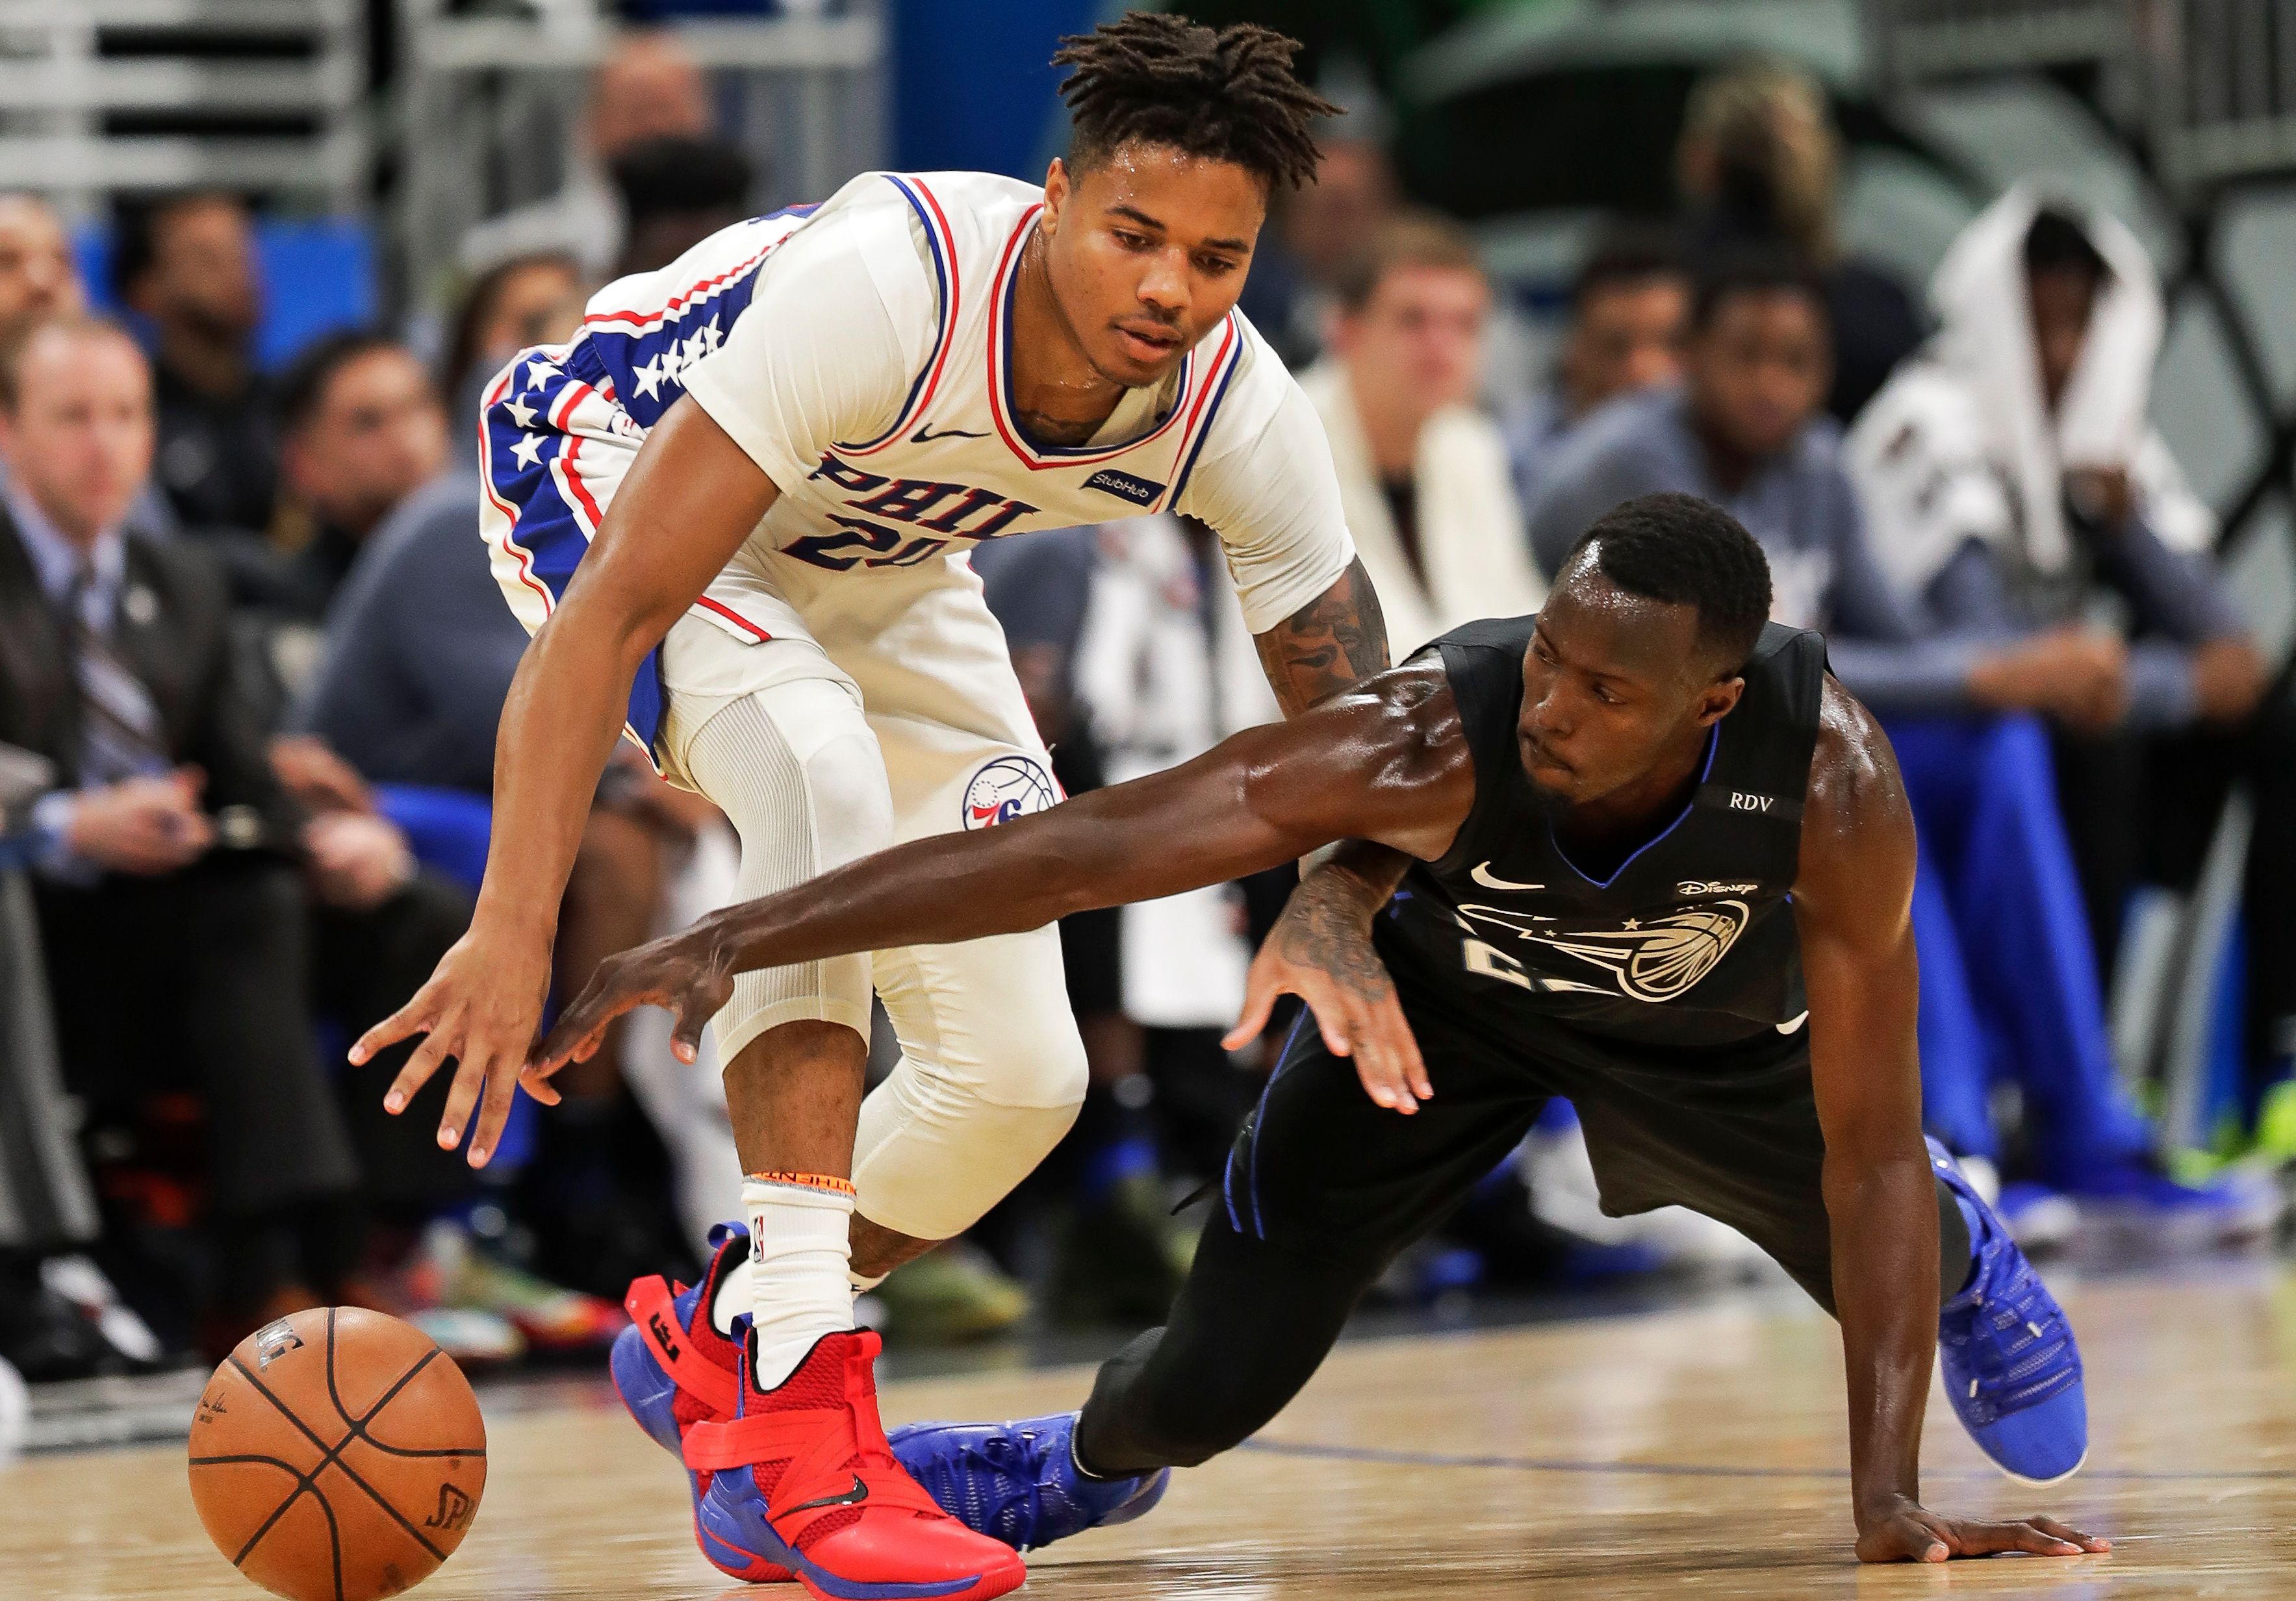 Nba Trade Rumors With Tobias Harris Deal Sixers Are All In On Title Pursuit So Is It Time To Move On From Markelle Fultz Rosenblatt Nj Com